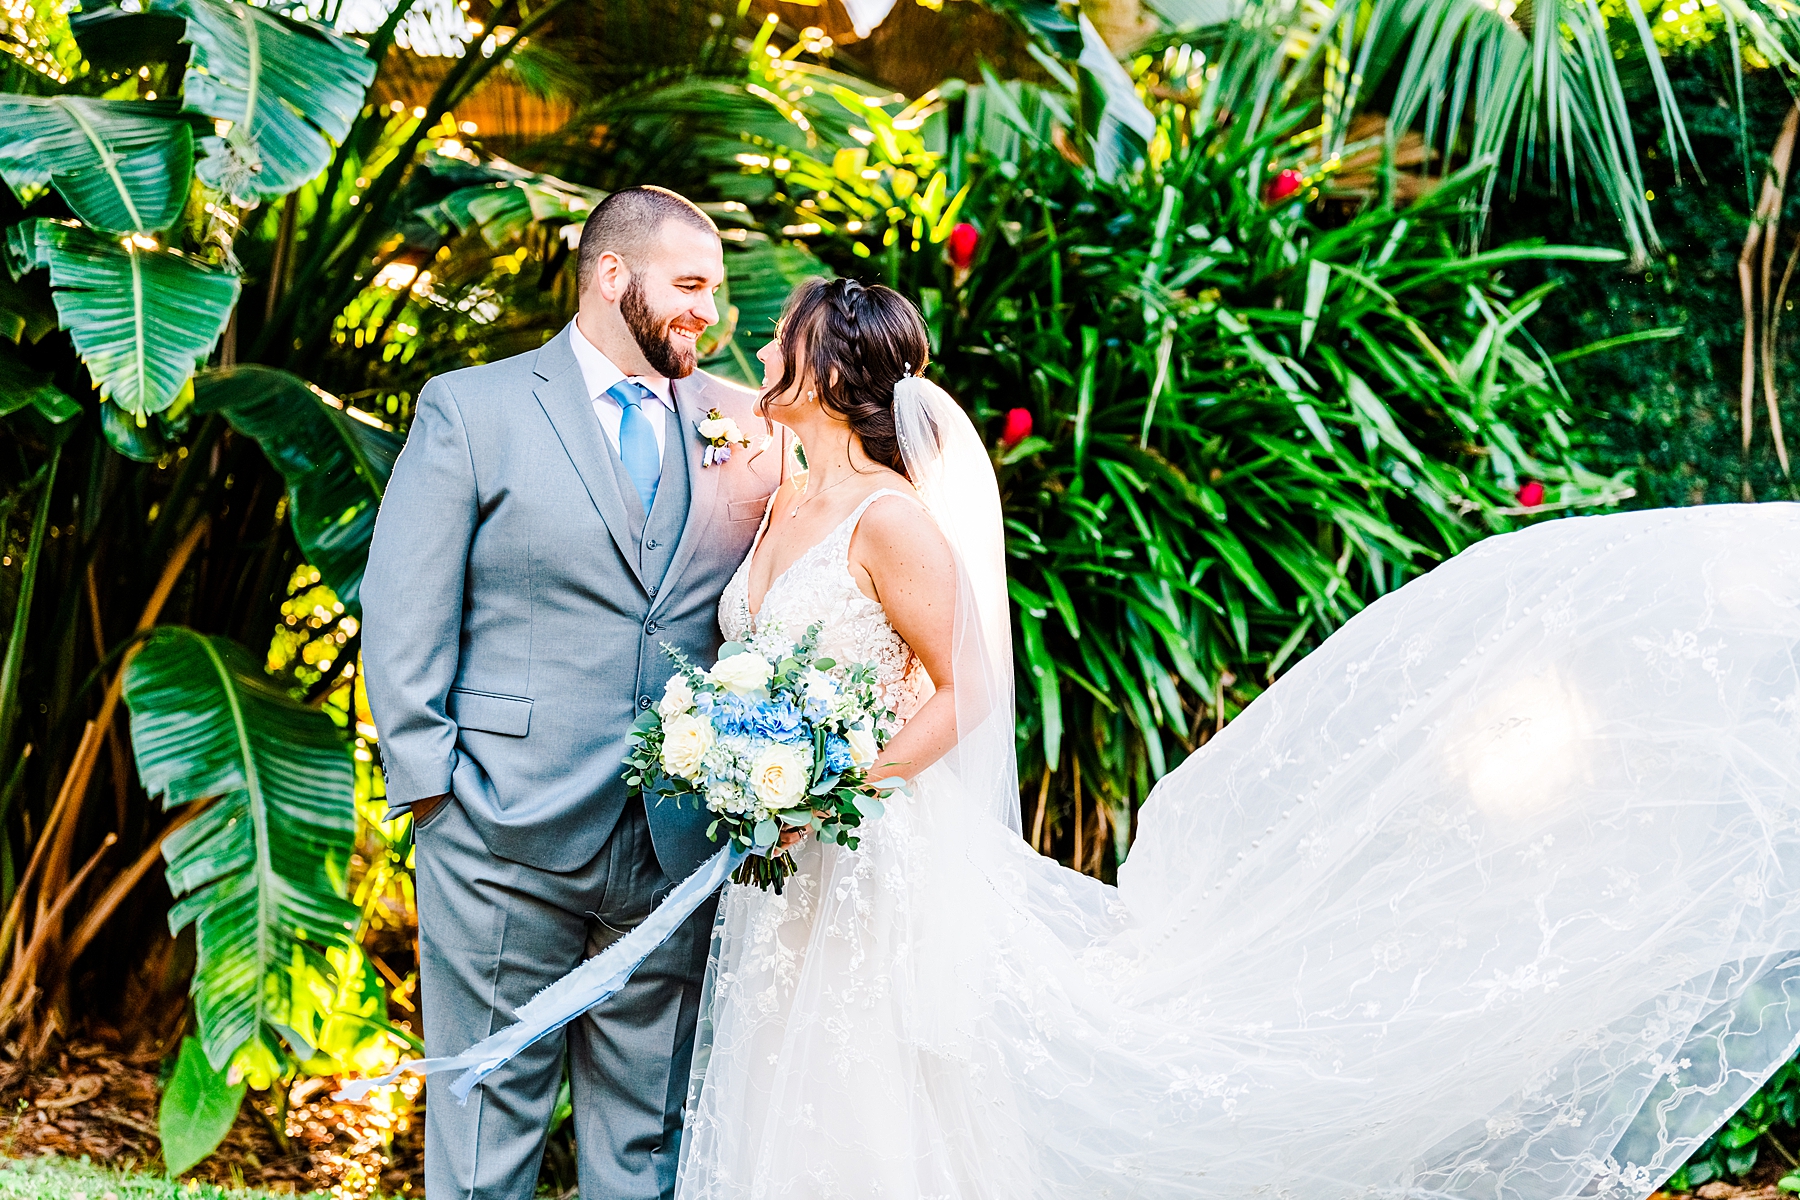 Tampa Wedding Photographer | The Delamater House Wedding | Chynna Pacheco Photography-690